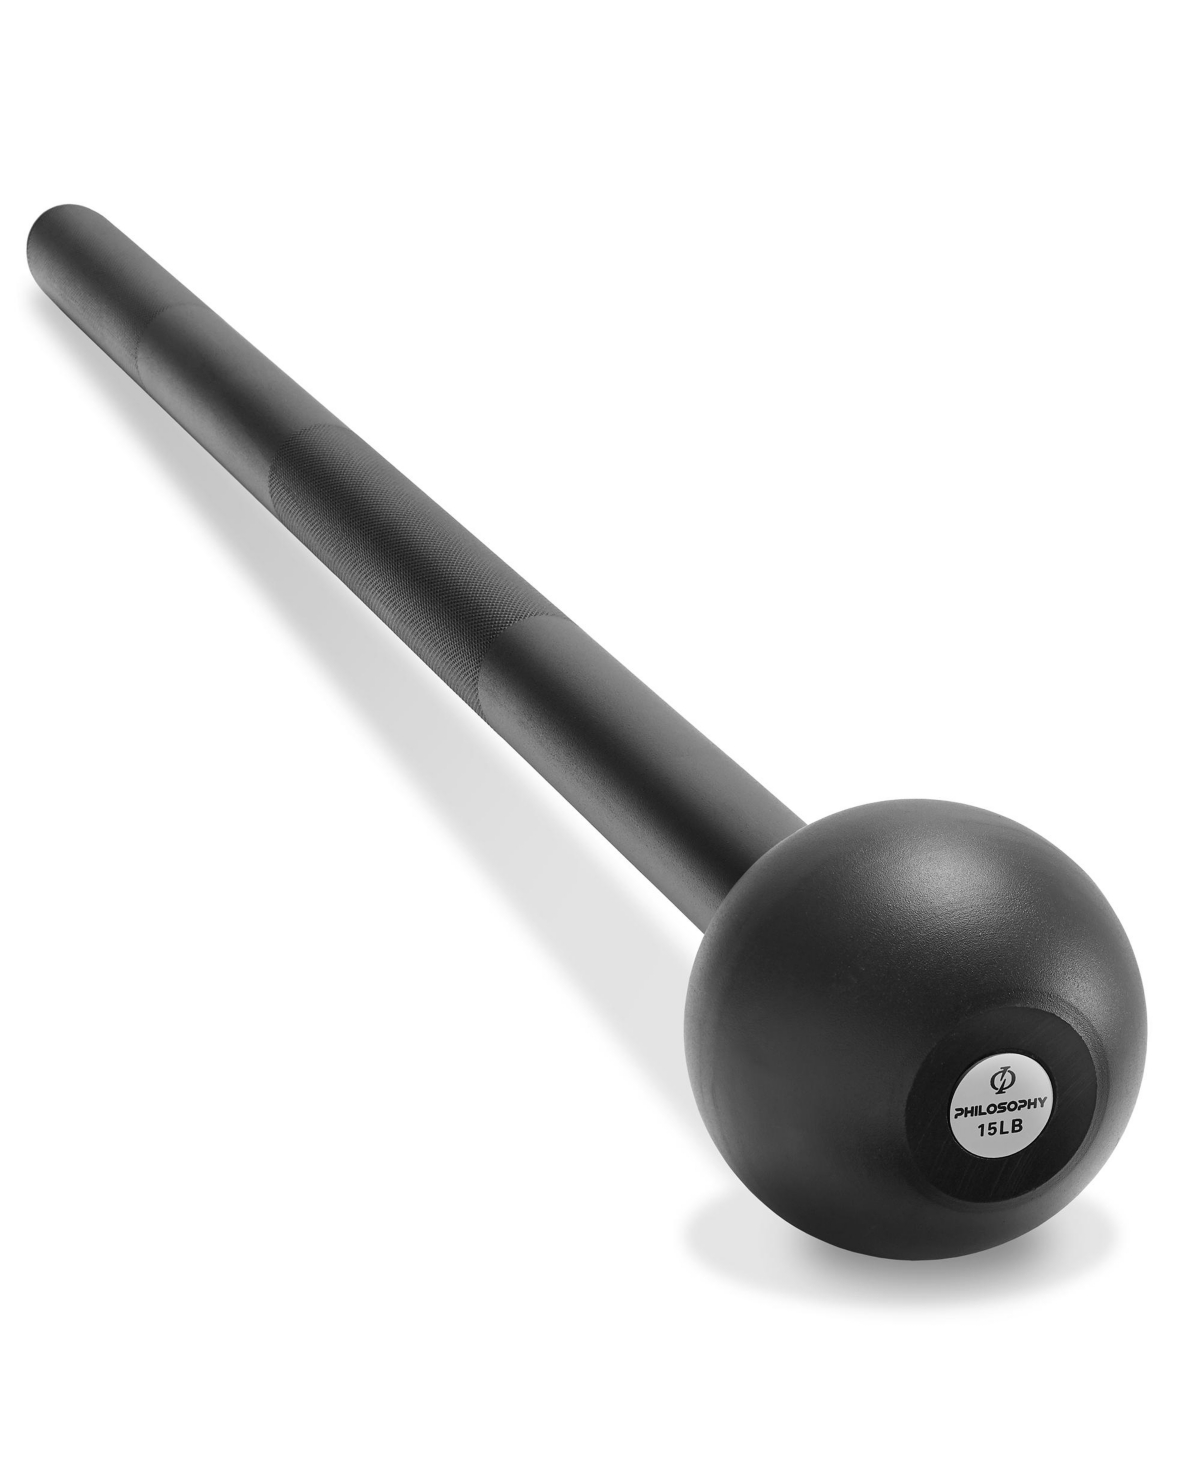 Steel Mace Bell 15 Lb, Mace Club for Strength Training, Functional Full Body Workouts - Black